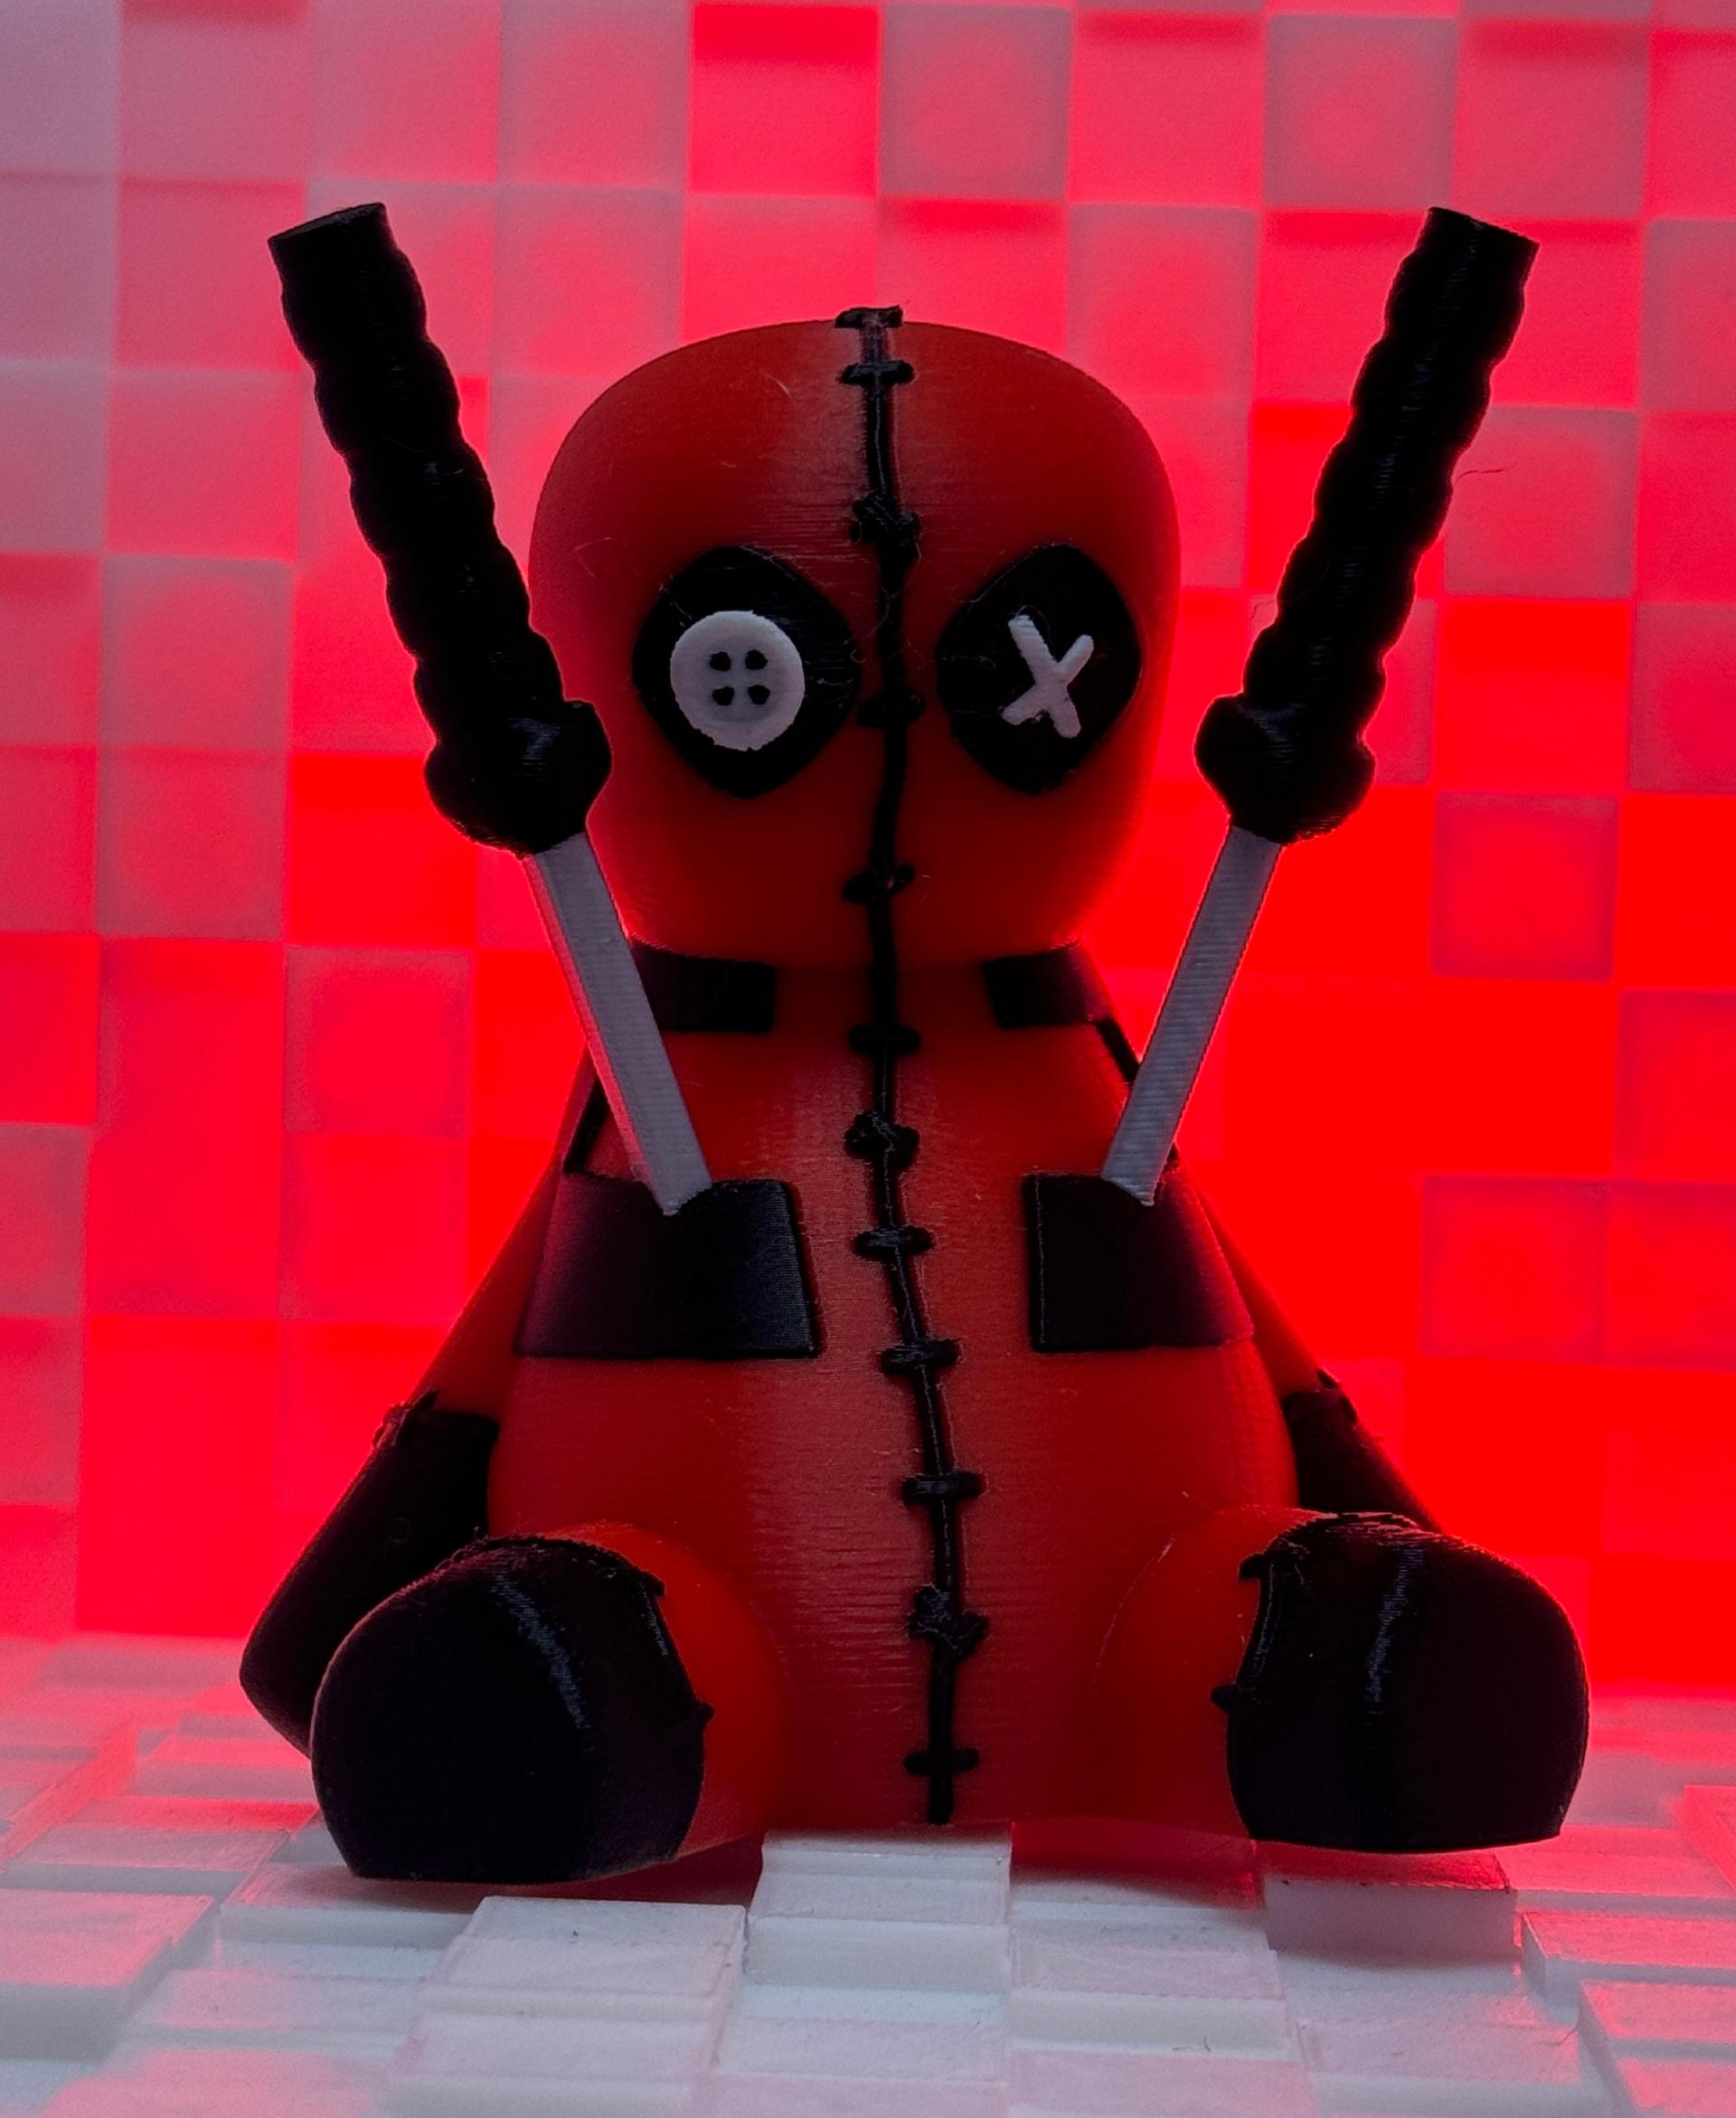 Deadpool Voodoo - Printed on the Bambu Lab A1 Mini, in Elegoo Red and Black PLA, Polymaker White and Silk Silver PLA. - 3d model